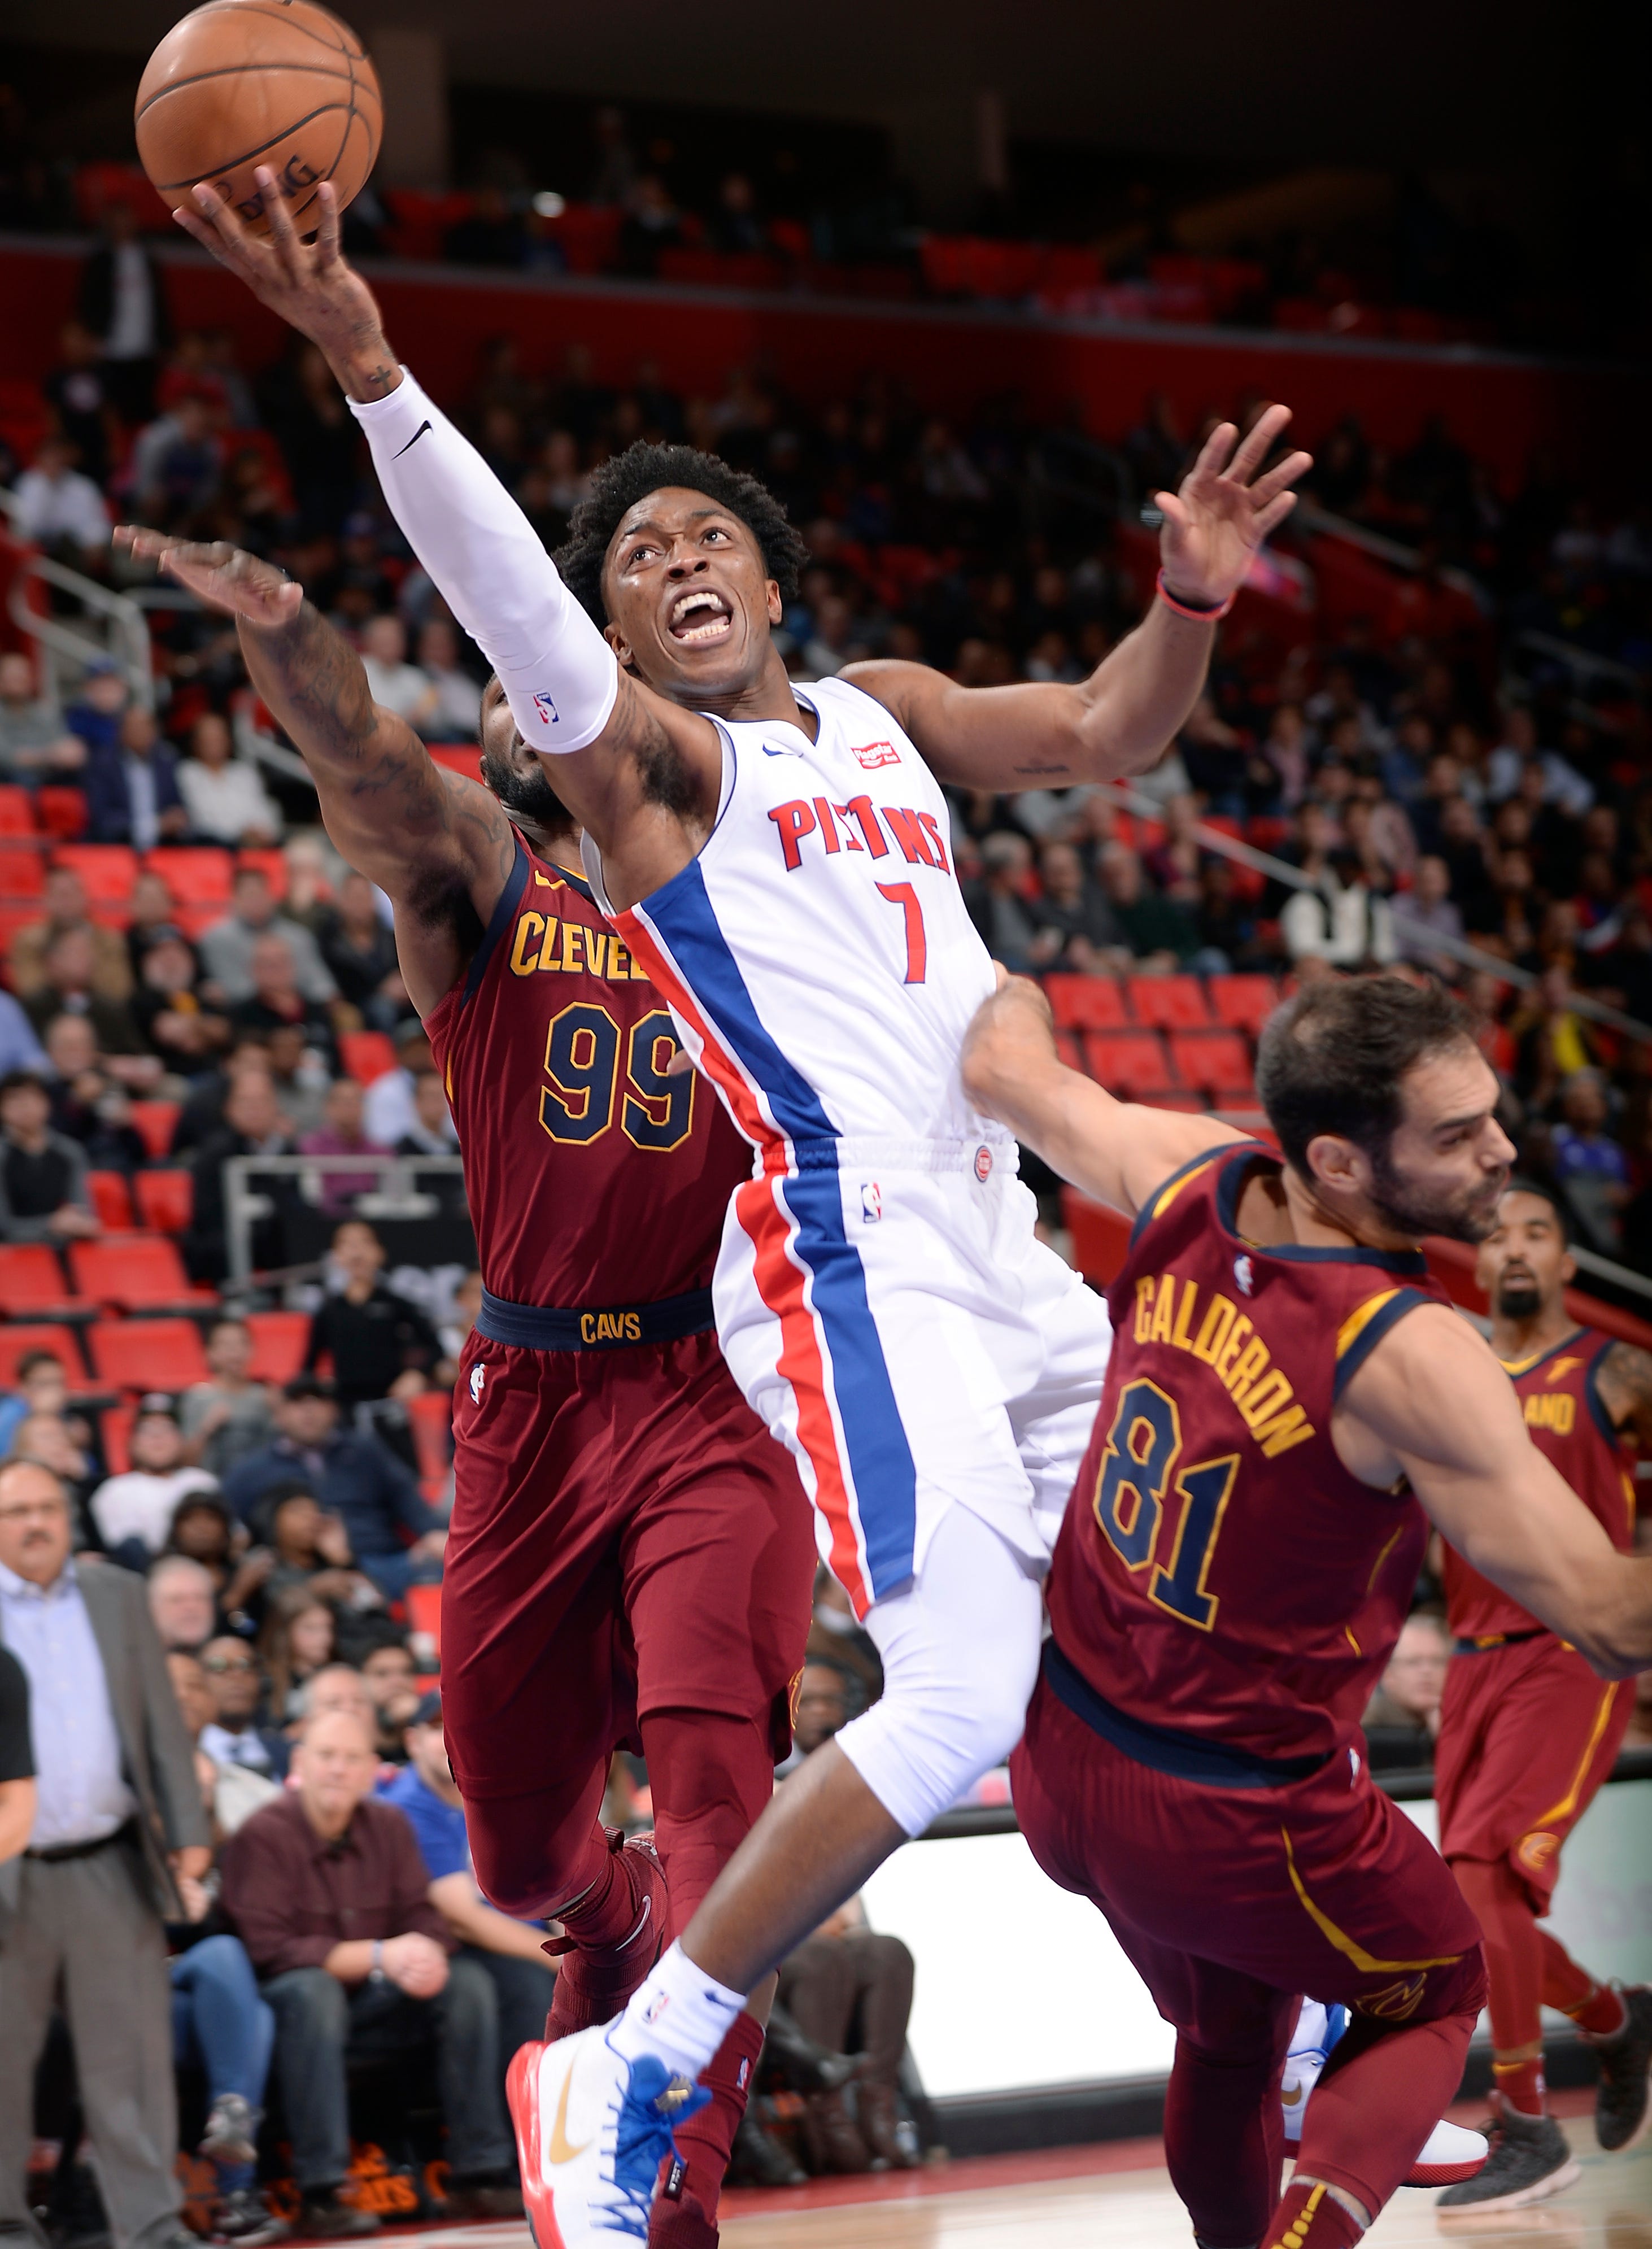 5. Stanley Johnson, F: Even though he’s been up and down in his first three seasons, Johnson is a vital asset on the defensive end, where he can match up with some of the bigger forwards with his strength and quickness. He’ll have to shoot better and add more value offensively but with Detroit's main trio, Johnson doesn’t need to do as much. It’s also a contract year for Johnson, so it’s show-and-prove time.